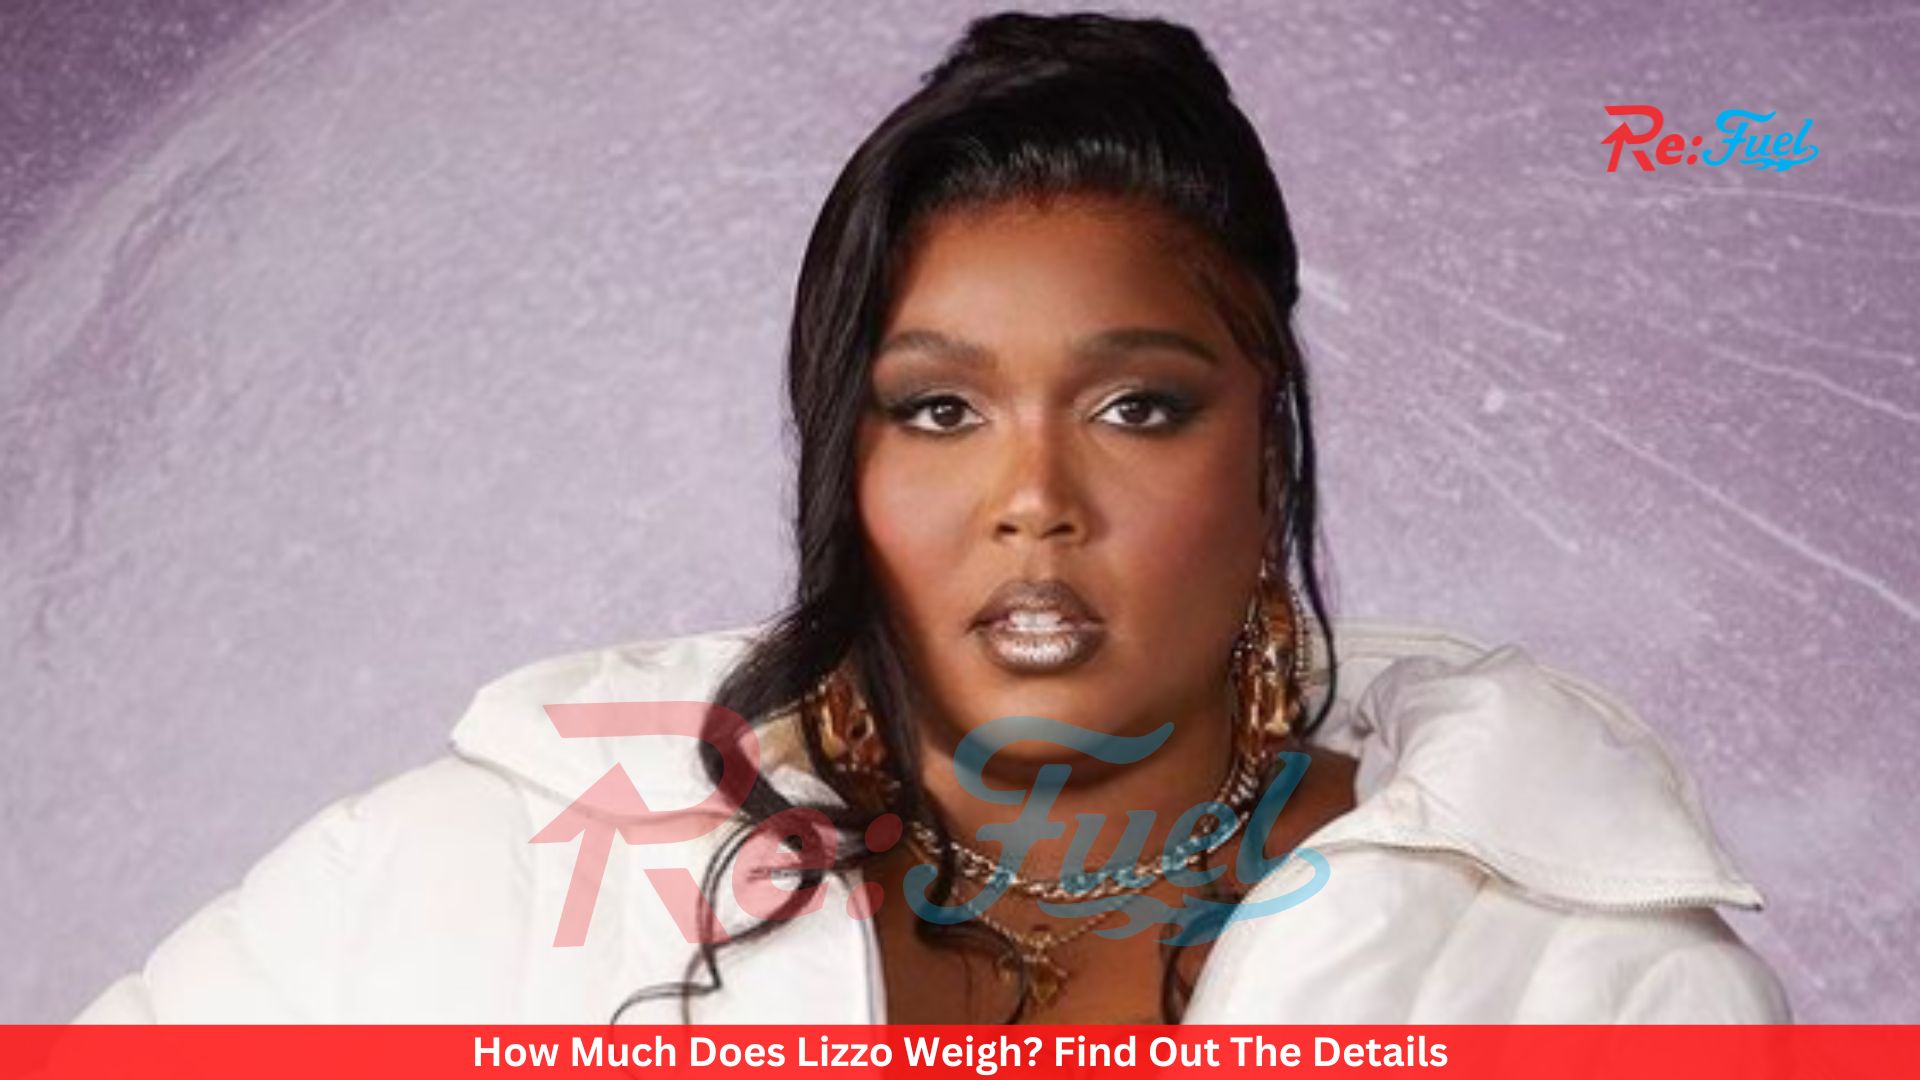 How Much Does Lizzo Weigh? Find Out The Details